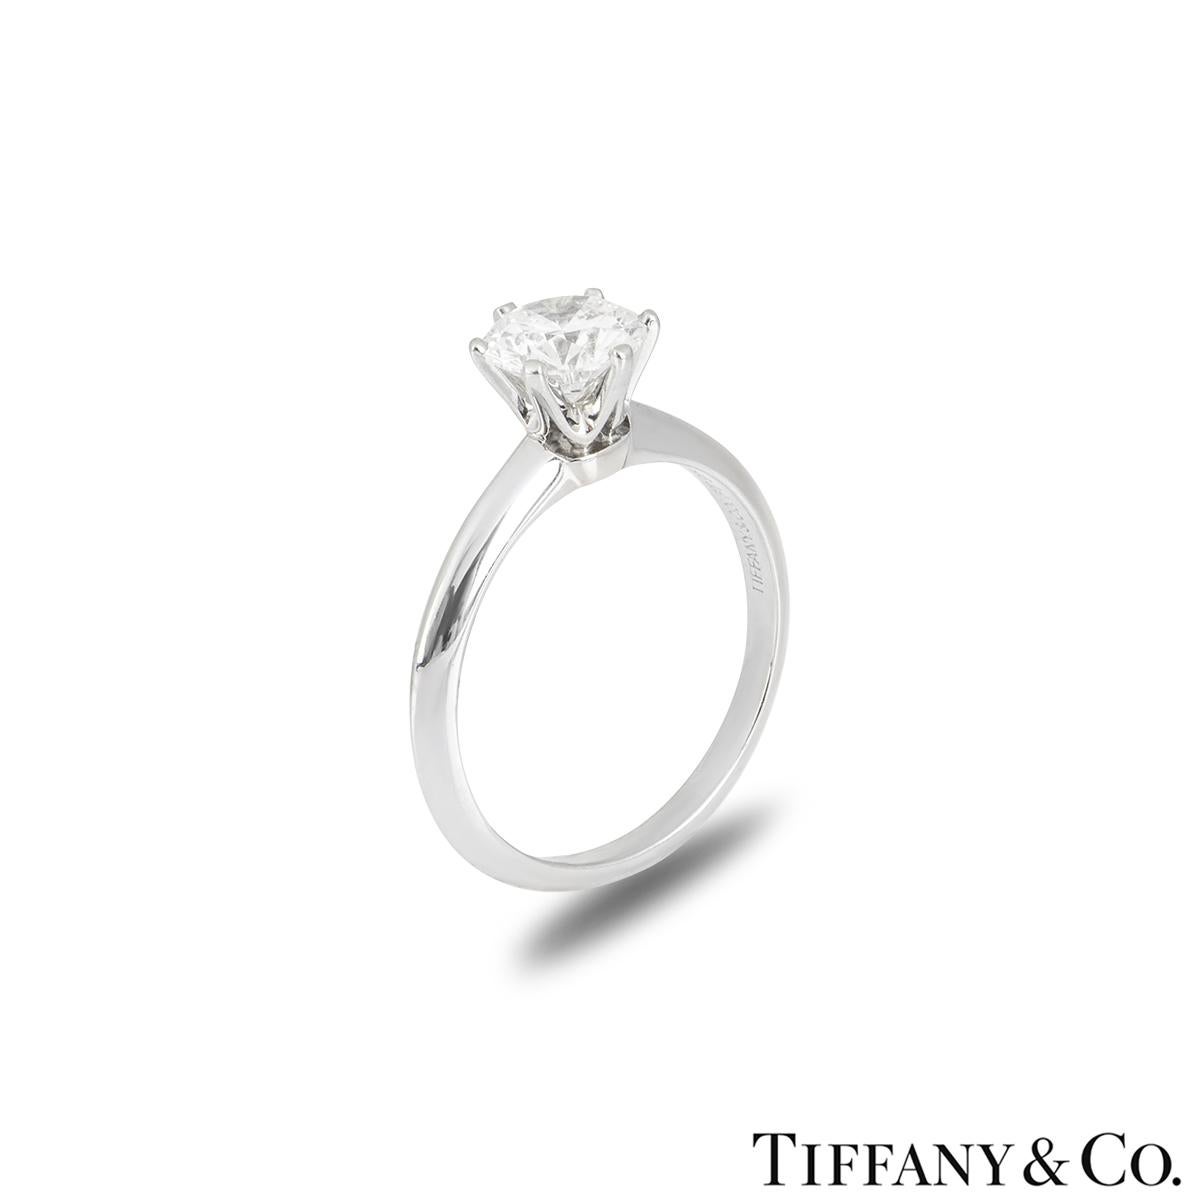 A stunning platinum diamond ring by Tiffany & Co. from the Setting collection. The ring comprises of a round brilliant cut diamond in a 6 claw setting with a weight of 1.07ct, E colour and VVS2 clarity. The ring is a UK size M/ US 6/ EU size 52 but